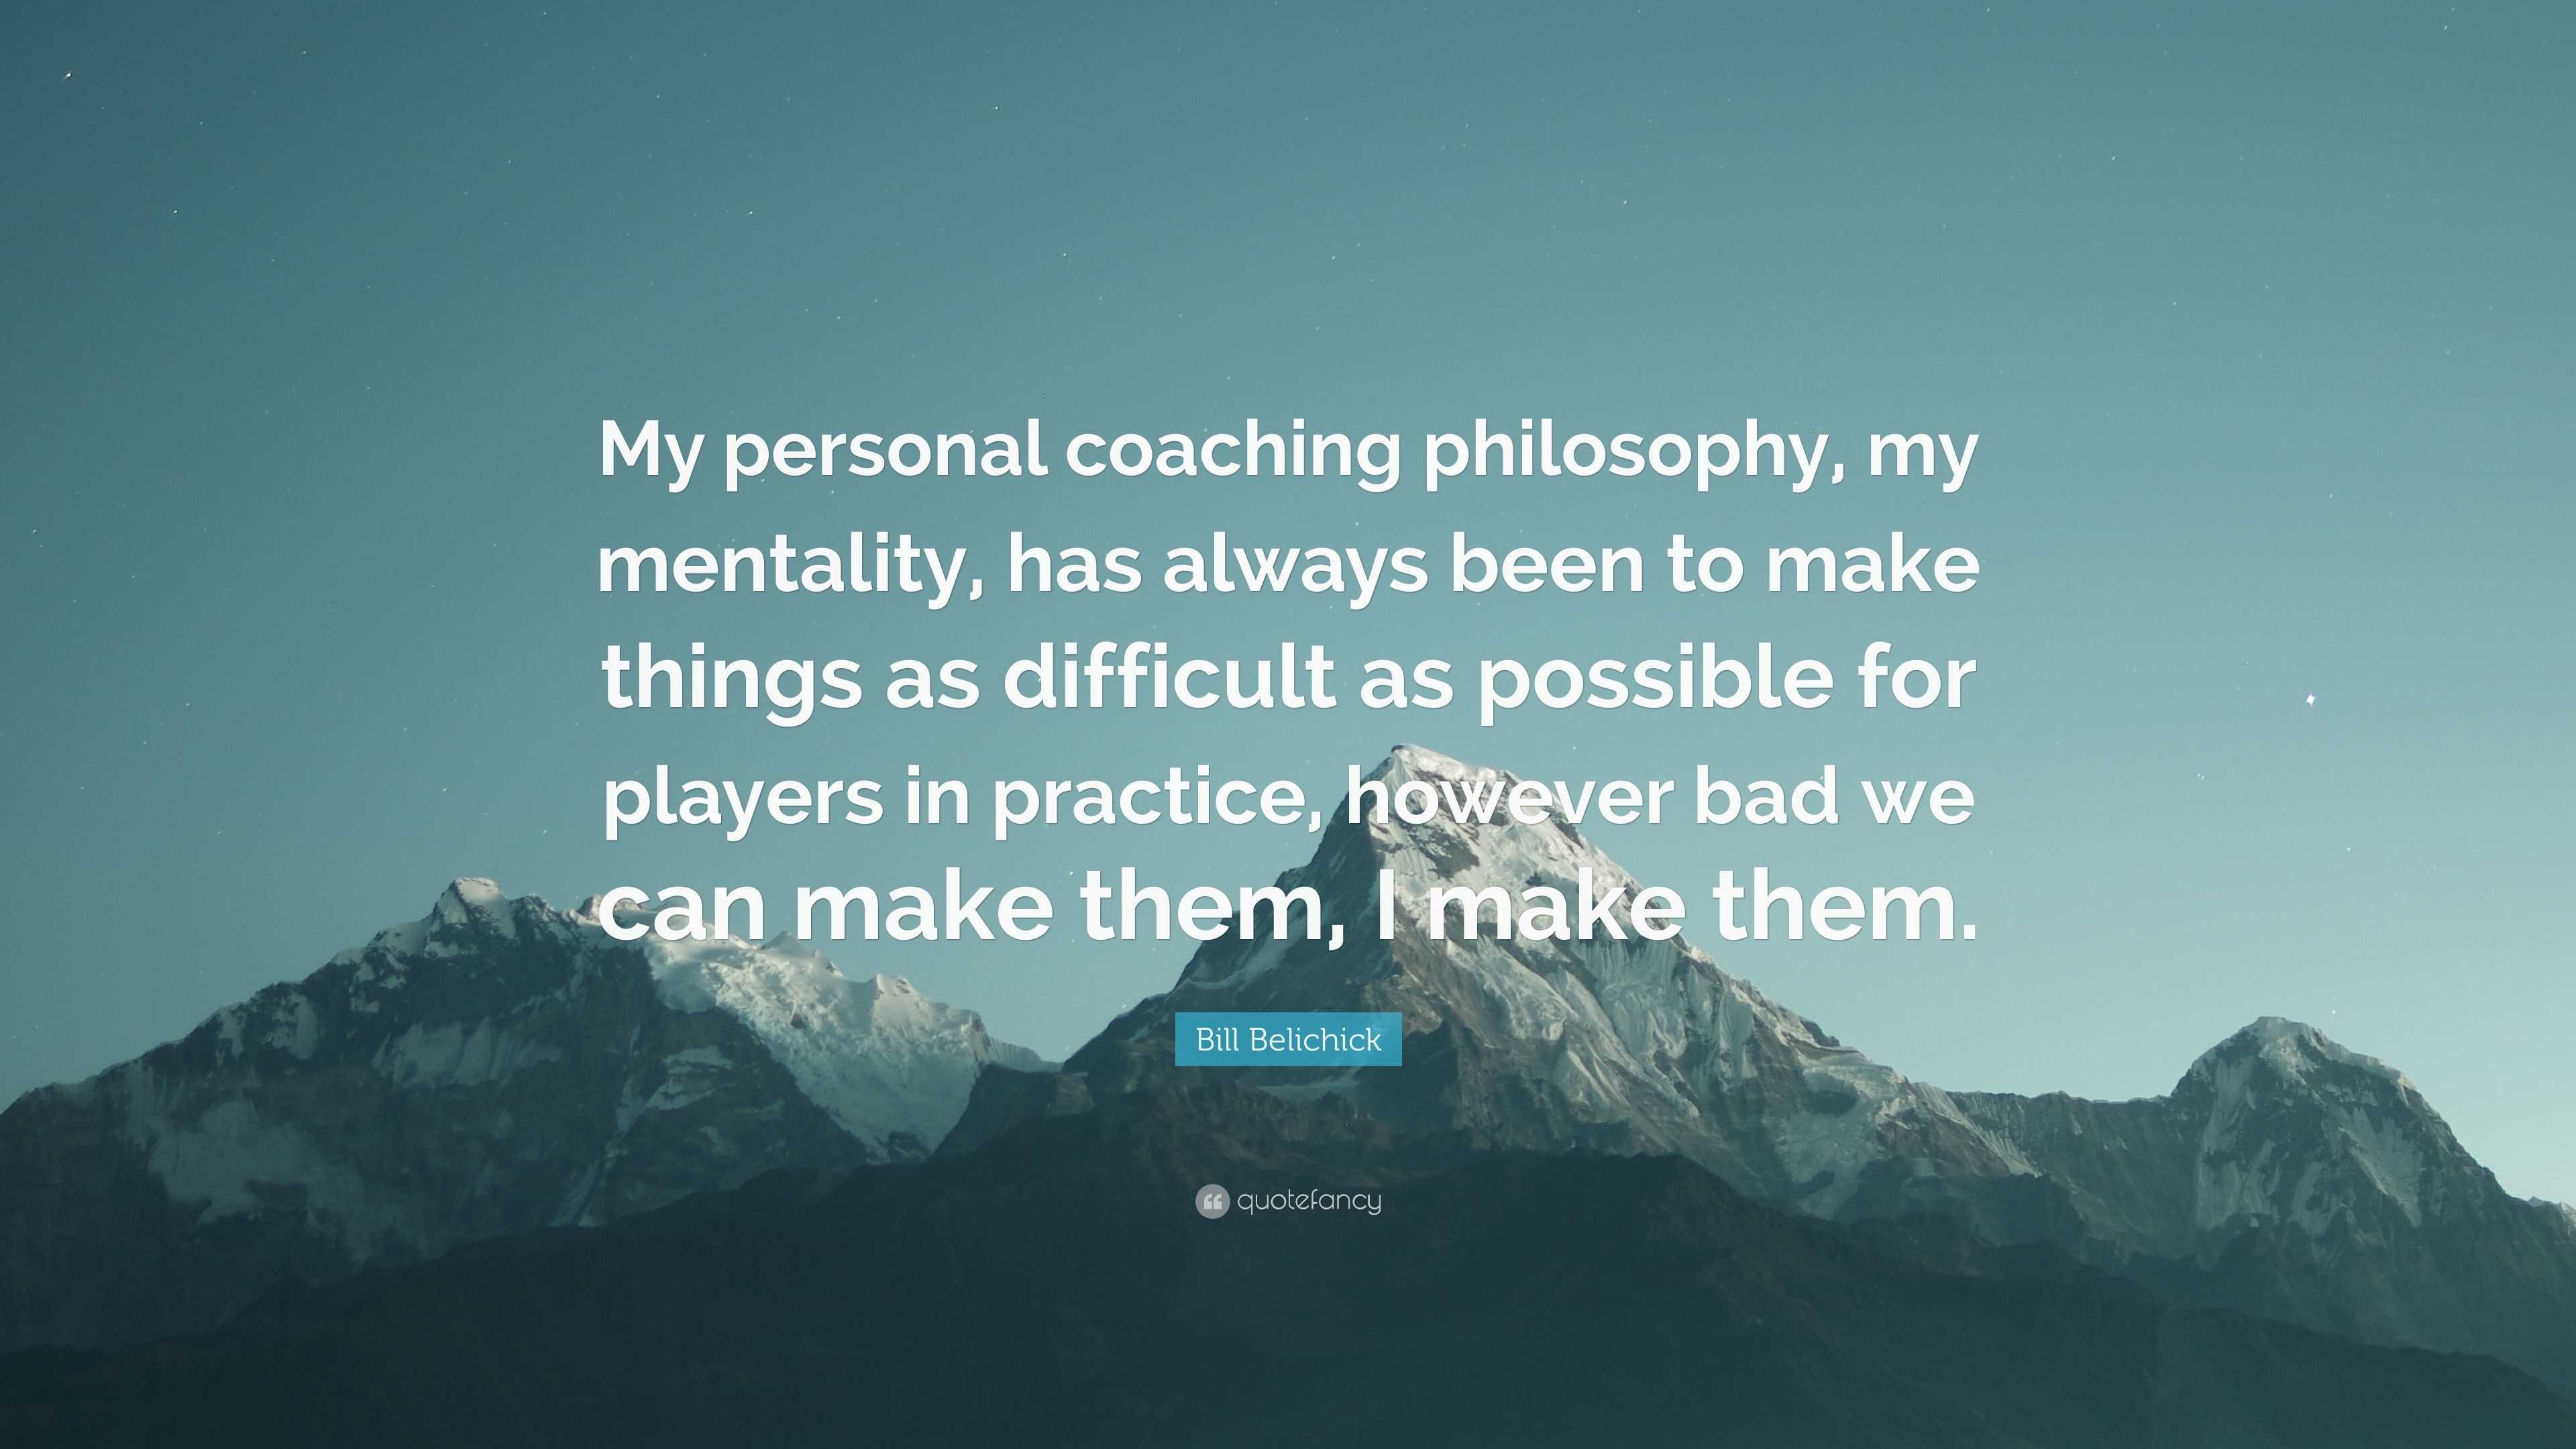 Bill Belichick Quote: “My personal coaching philosophy, my mentality, has  always been to make things as difficult as possible for players in pr...”